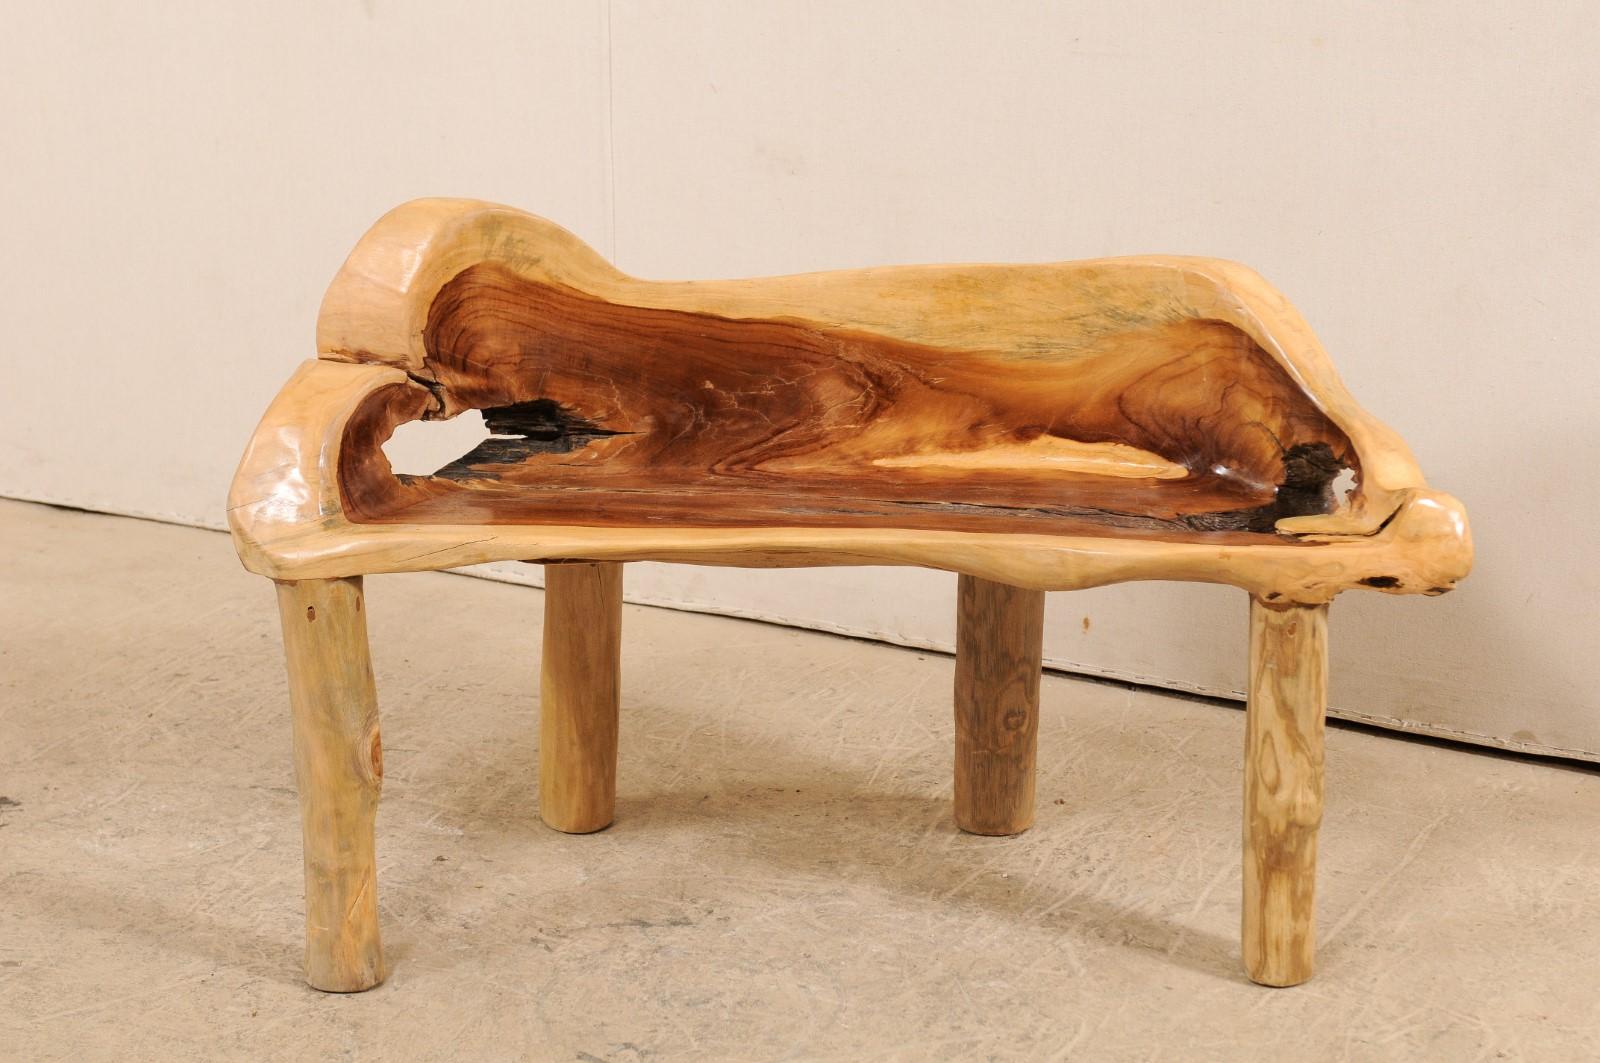 A natural teak wood bench with live edges. This cute little bench, just under 3.5 feet in length, has been created from the root and limbs of Indonesian teak wood, which has been smoothed and polished. Teak is a tropical hardwood which is